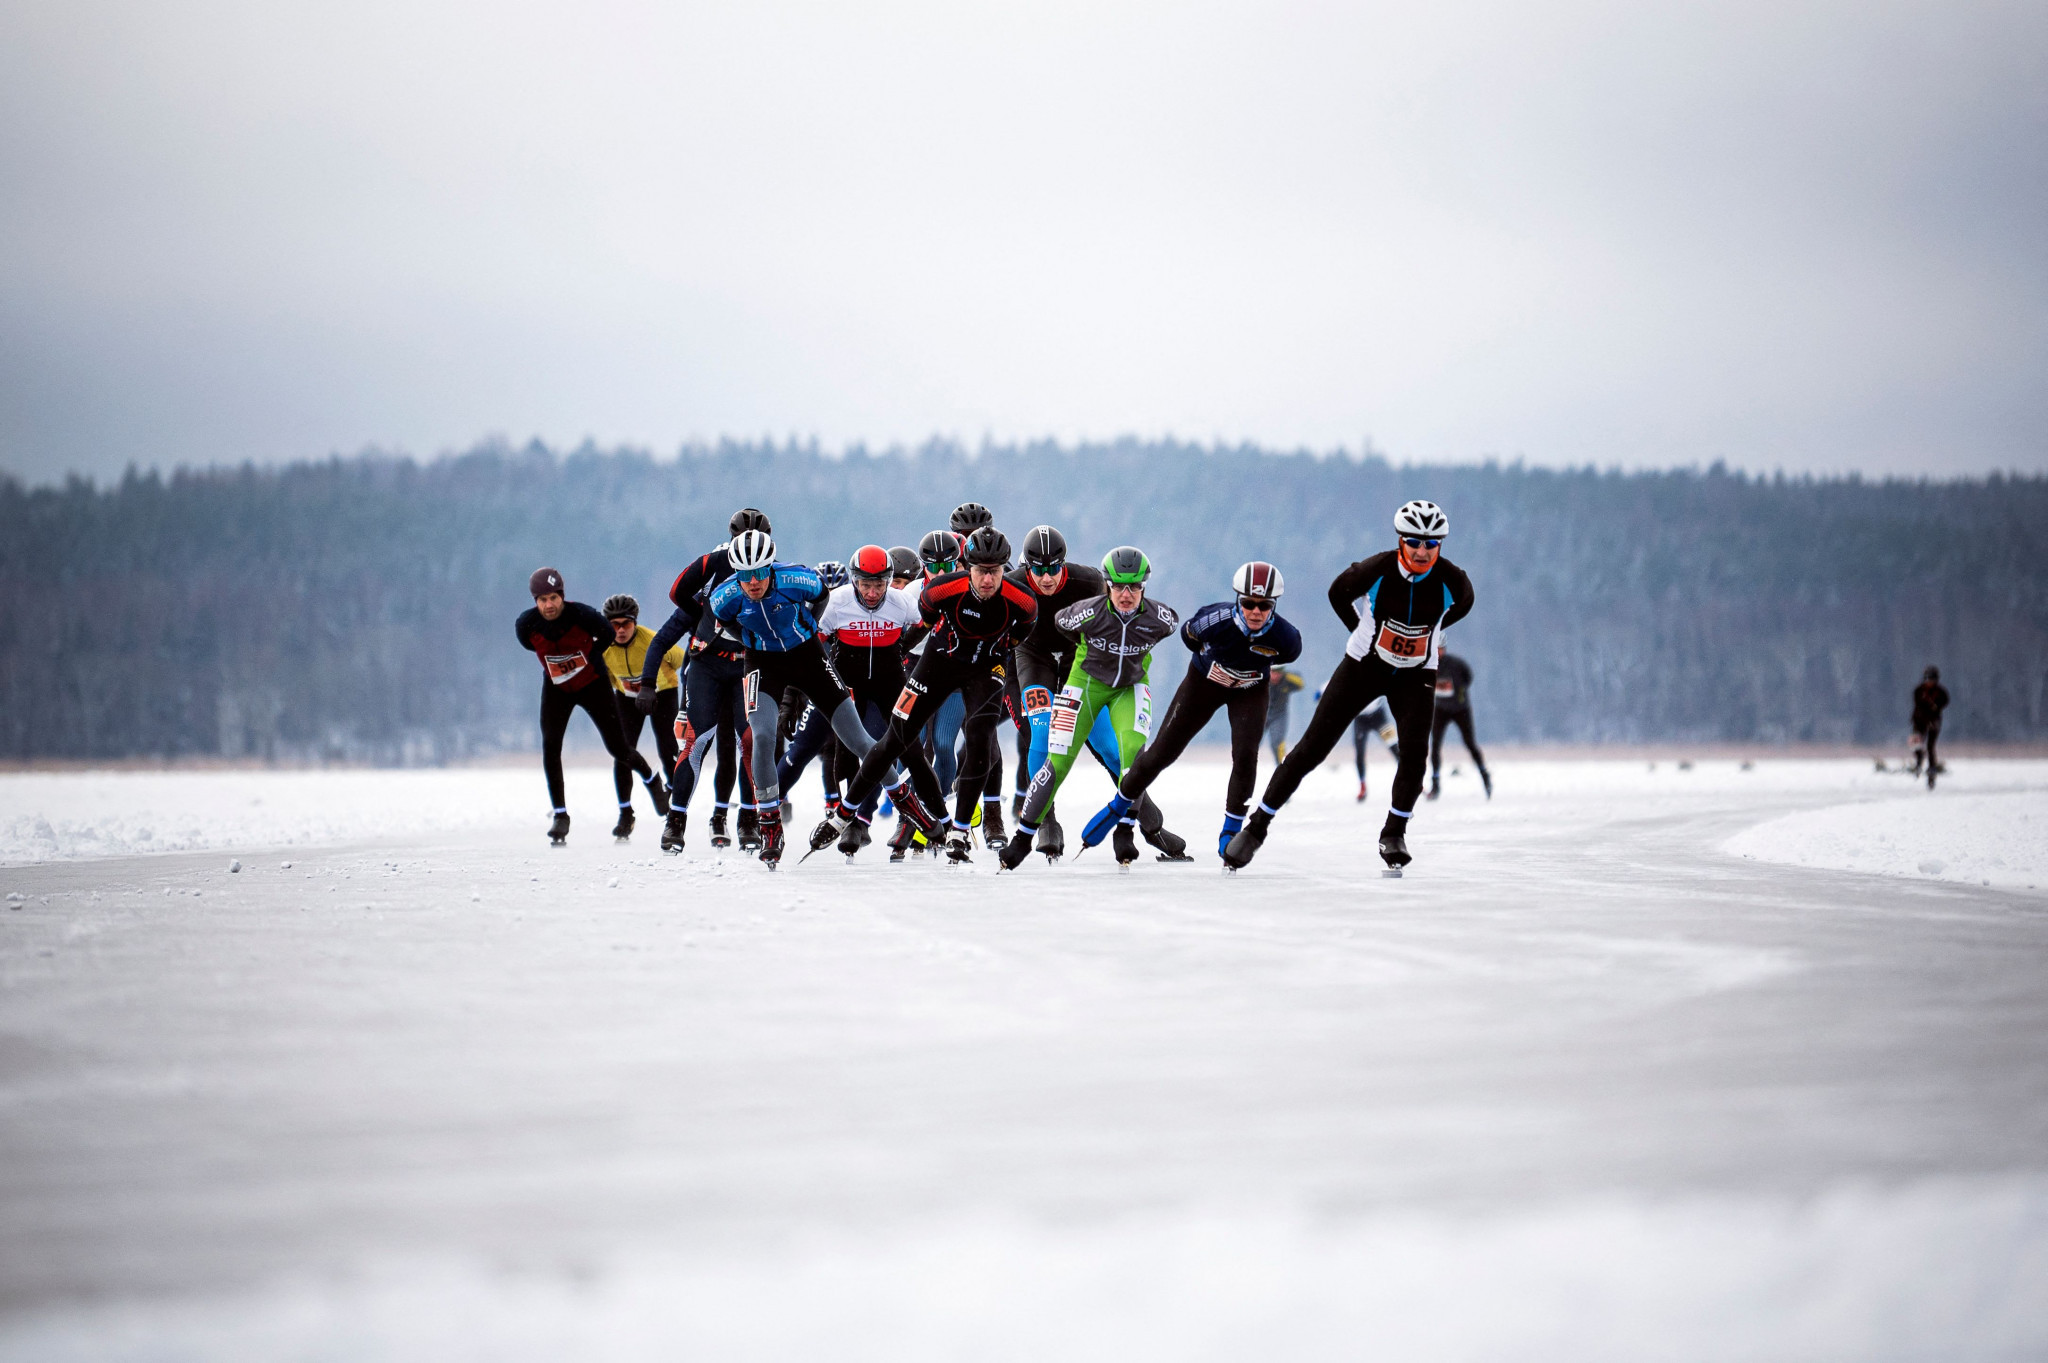 Lake Placid is set to host this year's FISU World University Speed Skating Championship ©Getty Images